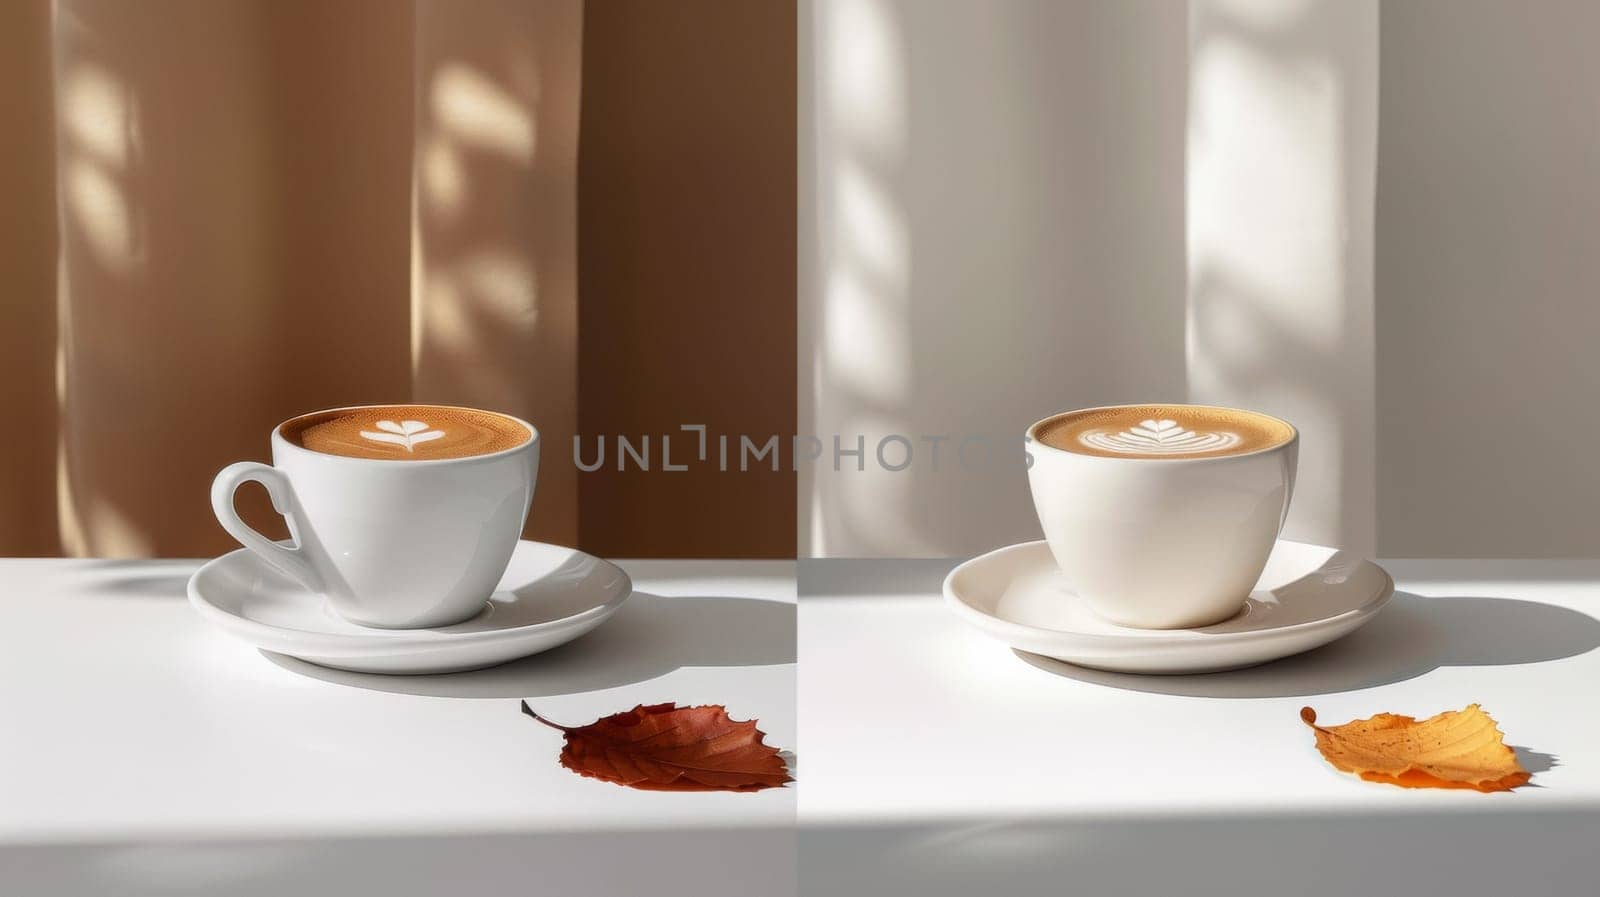 Two pictures of a cup with coffee and leaves on the table